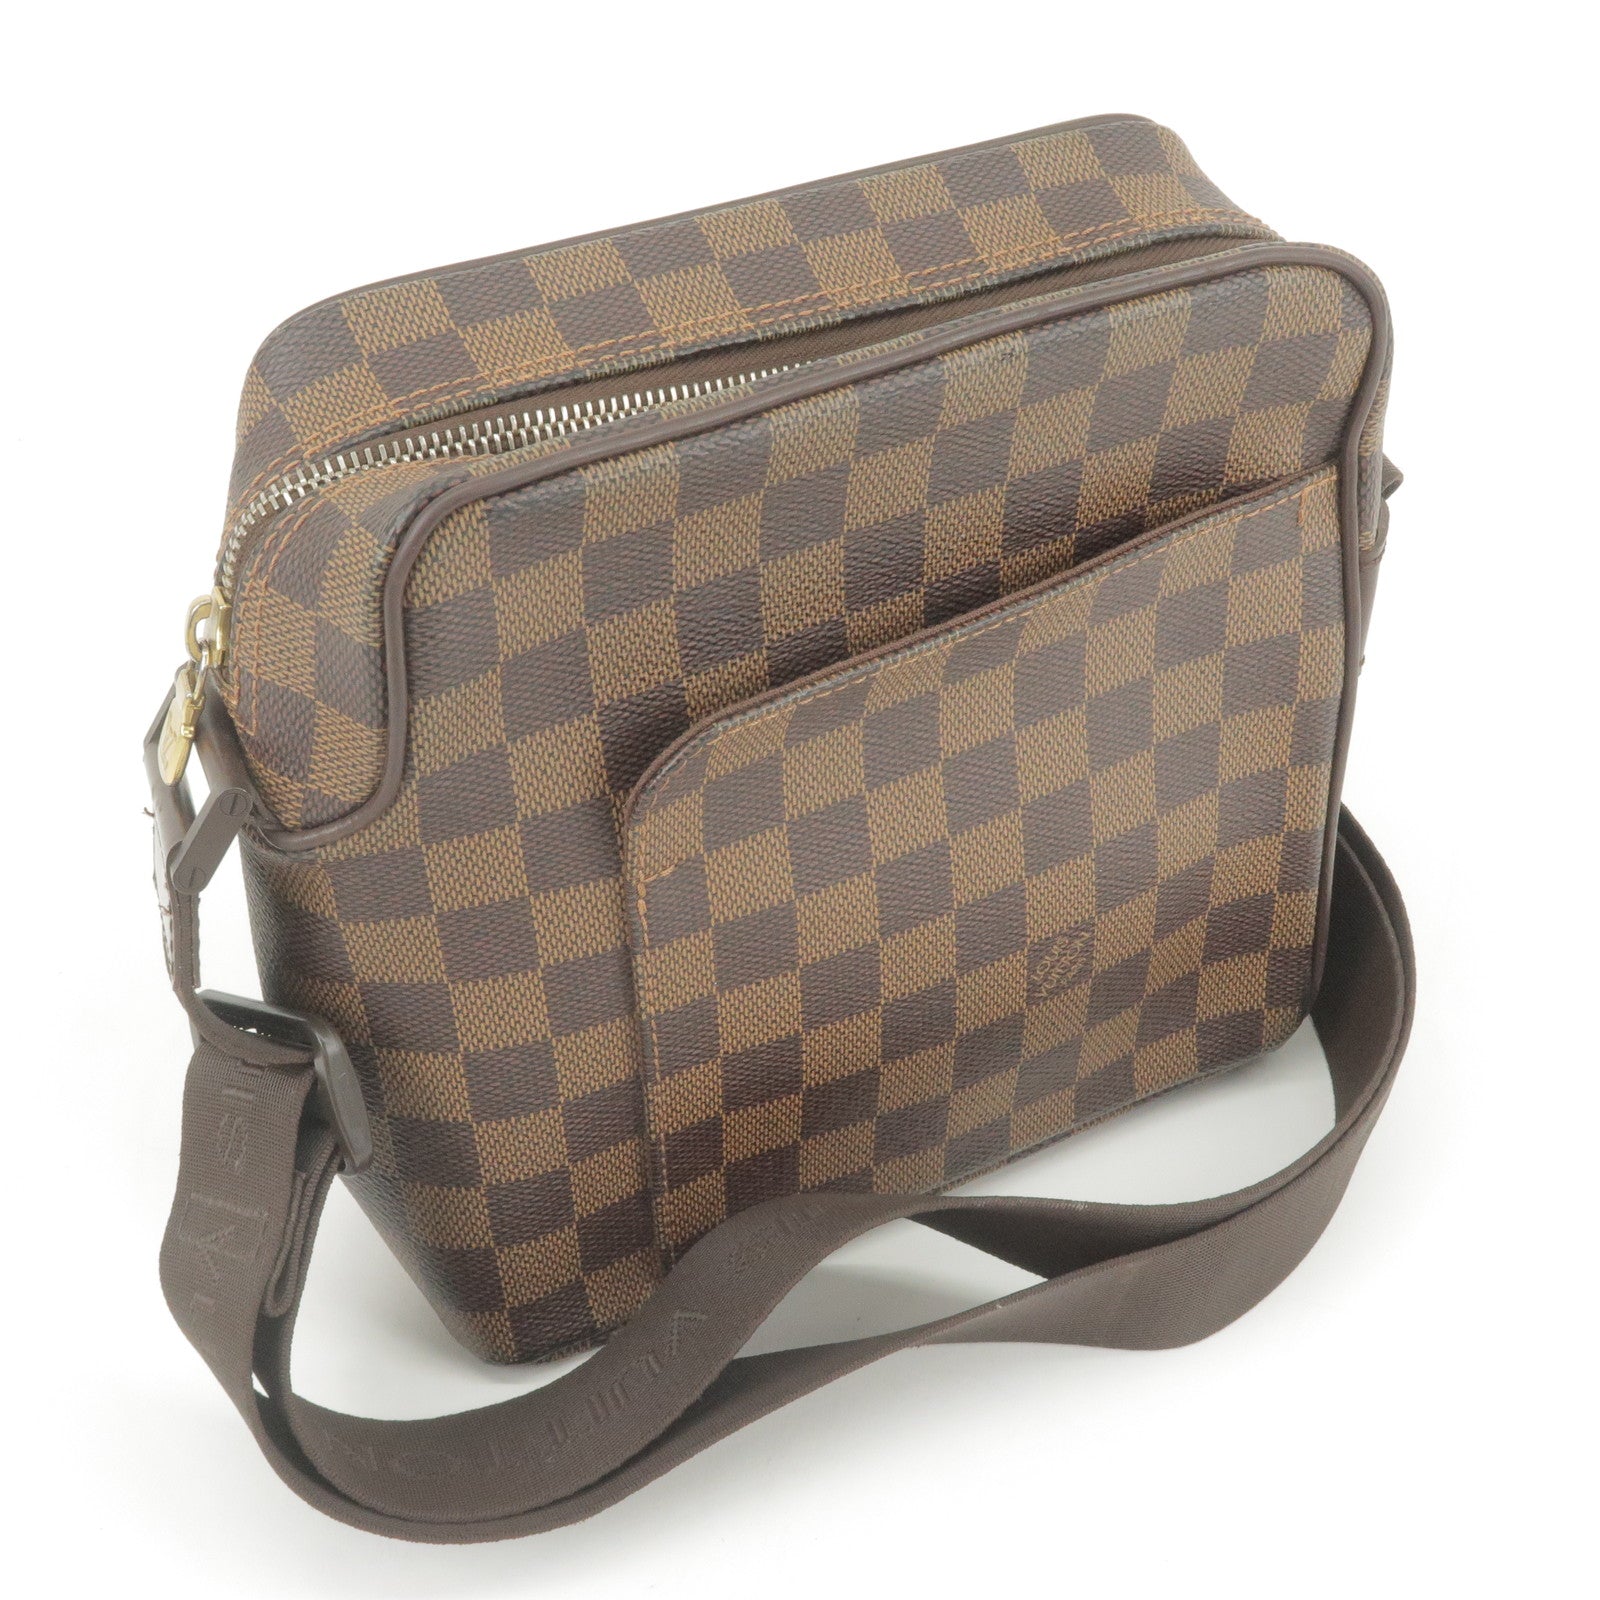 PM - Cross - Louis - Bag - Olaf - Vuitton - Shoulder - Louis Vuitton  Porte-habits clothes-hangers in green taiga leather and green canvas -  N41442 – Louis Vuitton Brazza Wallet Black For Men - Damier - Body